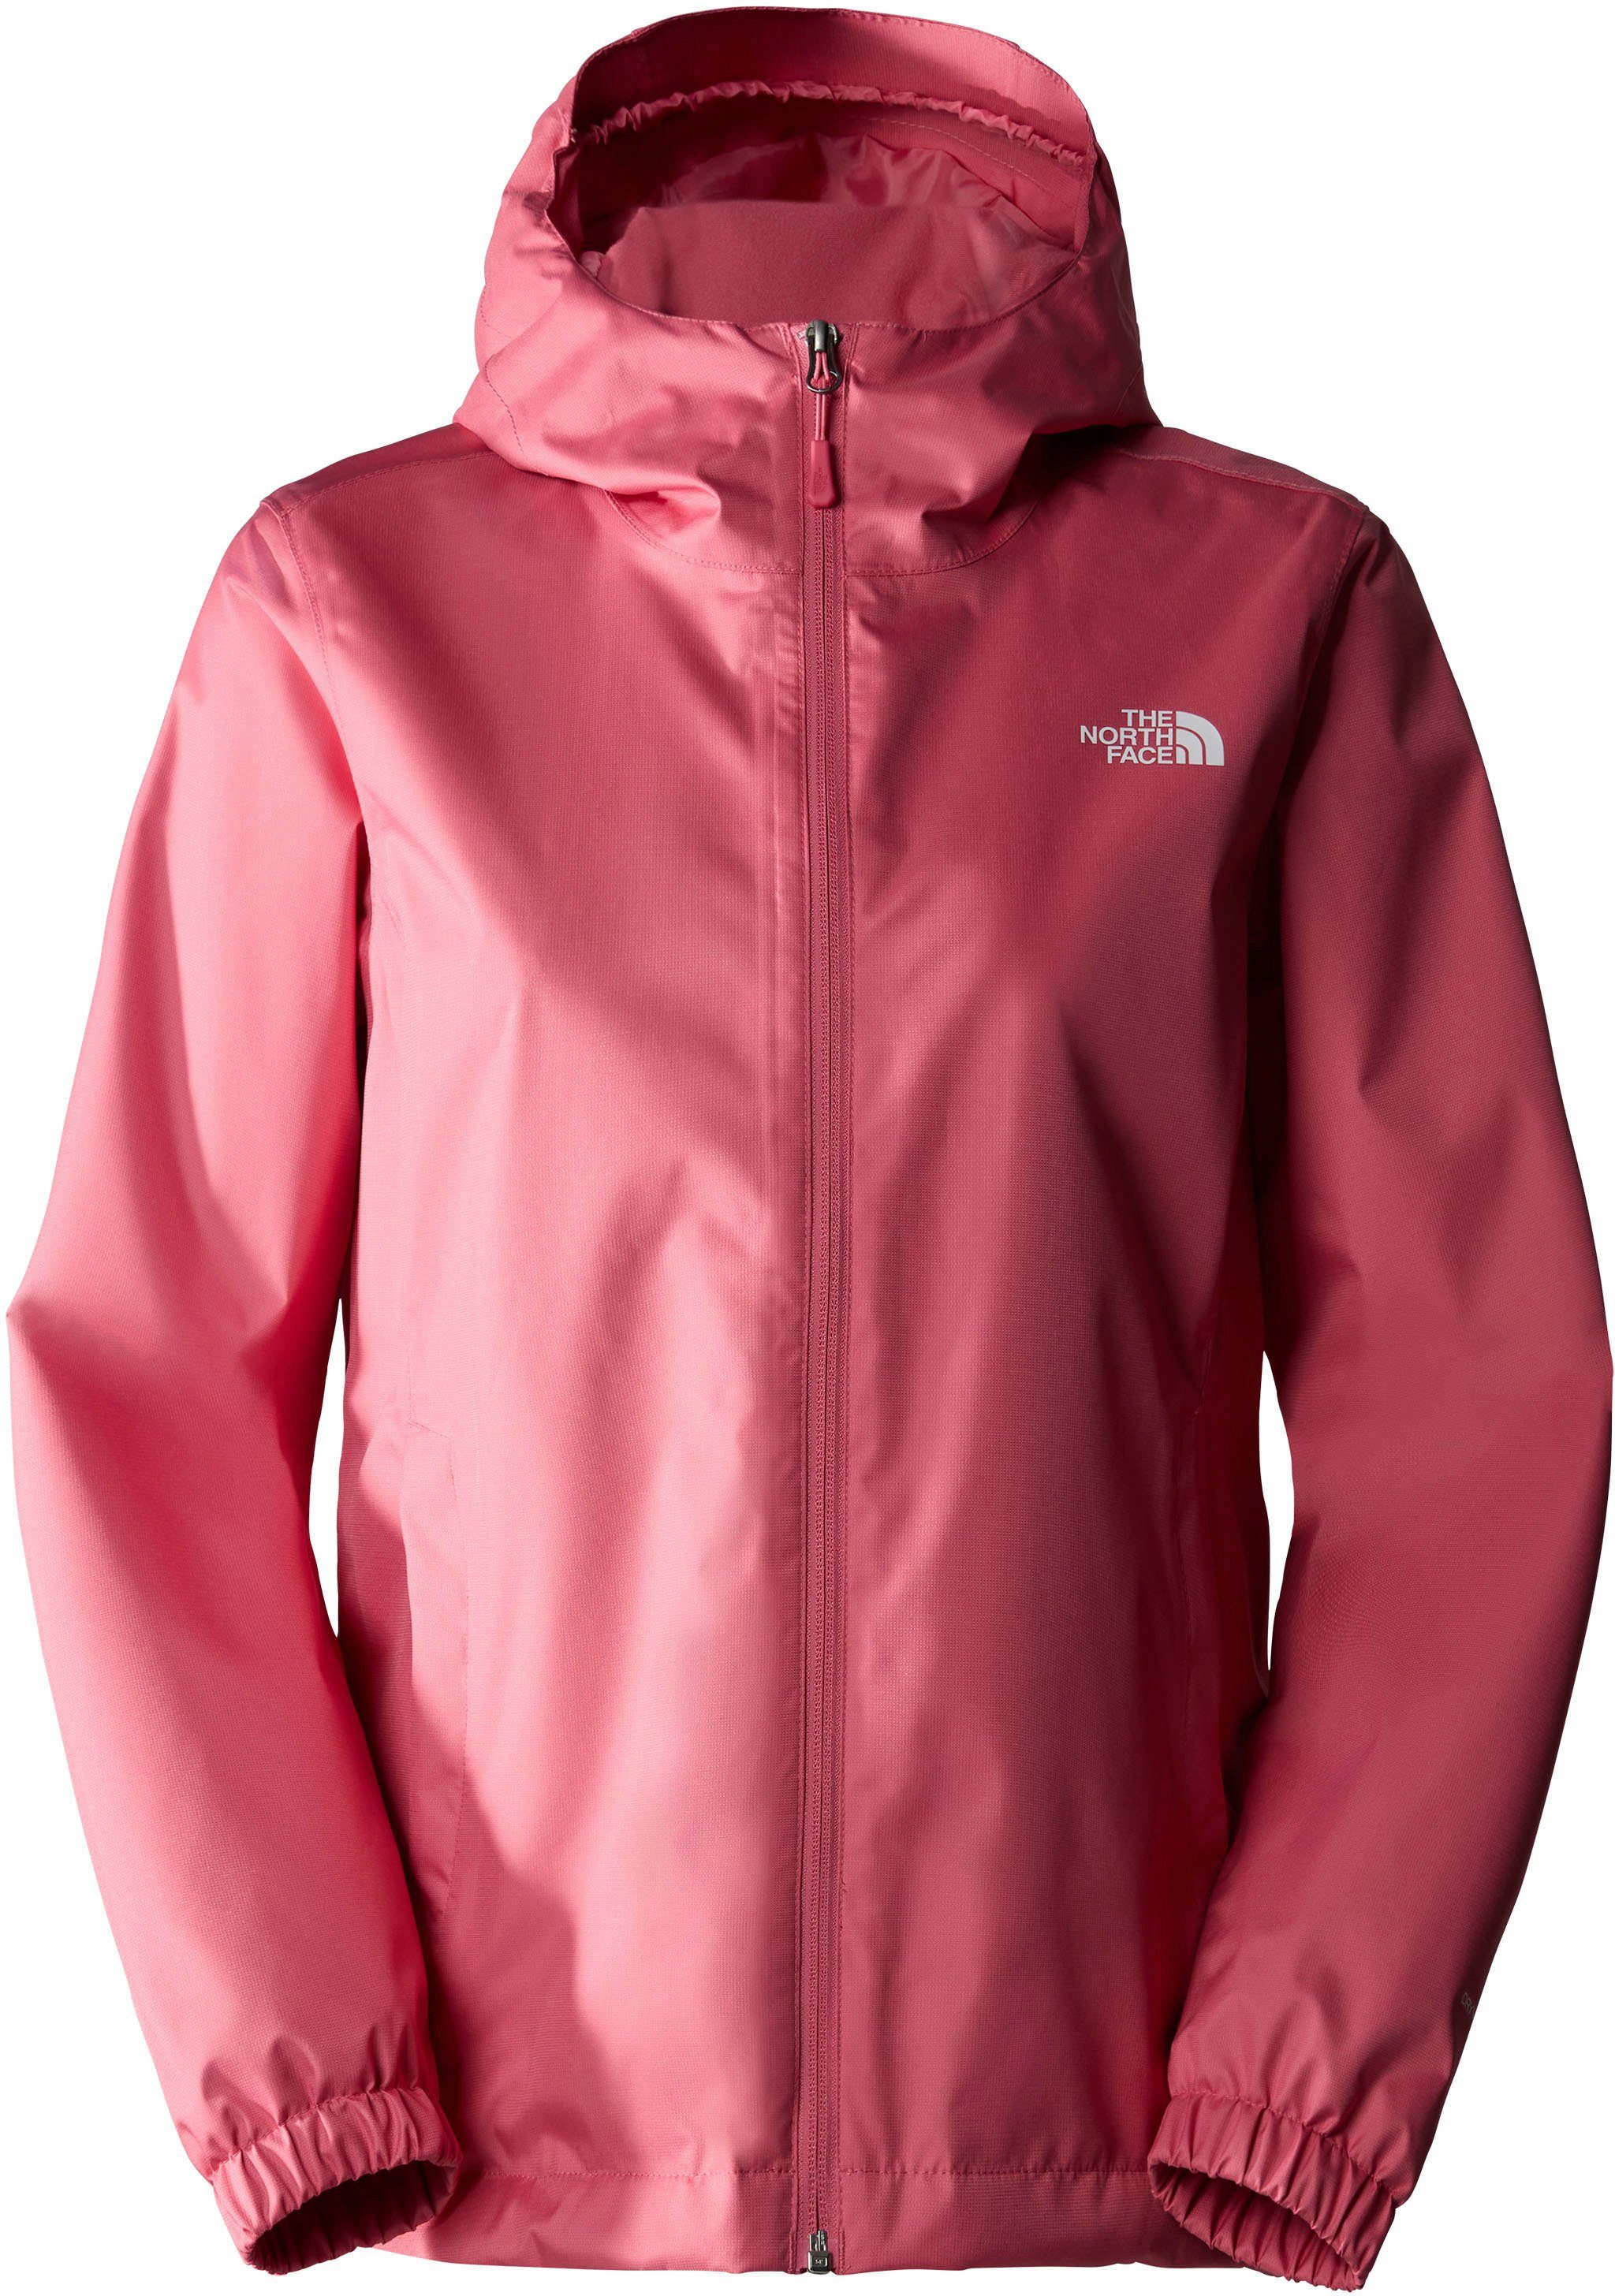 (1-St) cosmo North pink Funktionsjacke The Logostickerei - Face EU mit JACKET W QUEST